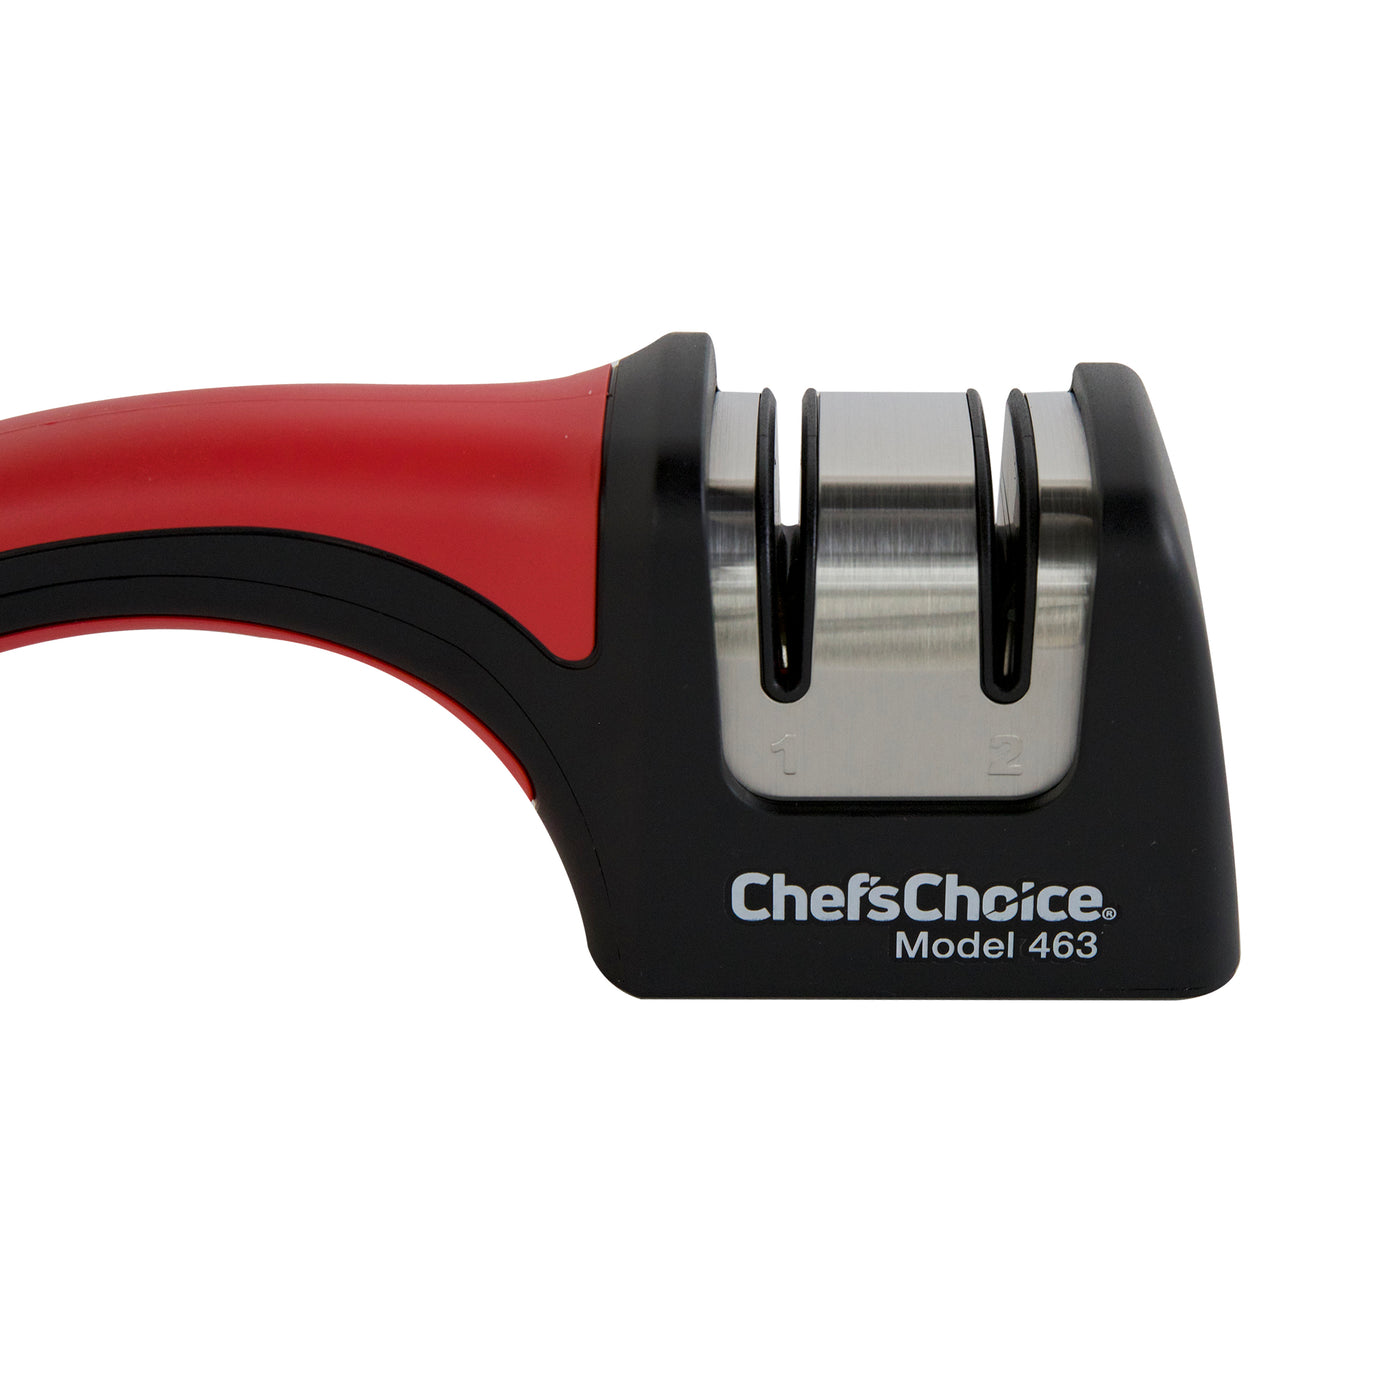 The Chef'sChoice® Pronto® Manual Diamond Hone® Sharpener Model 463 is  affordable, easy to use, quiet and extremely fast. It will put a flawless,  extremely sharp, better-than-factory 15-degree edge on 15-degree class  knives